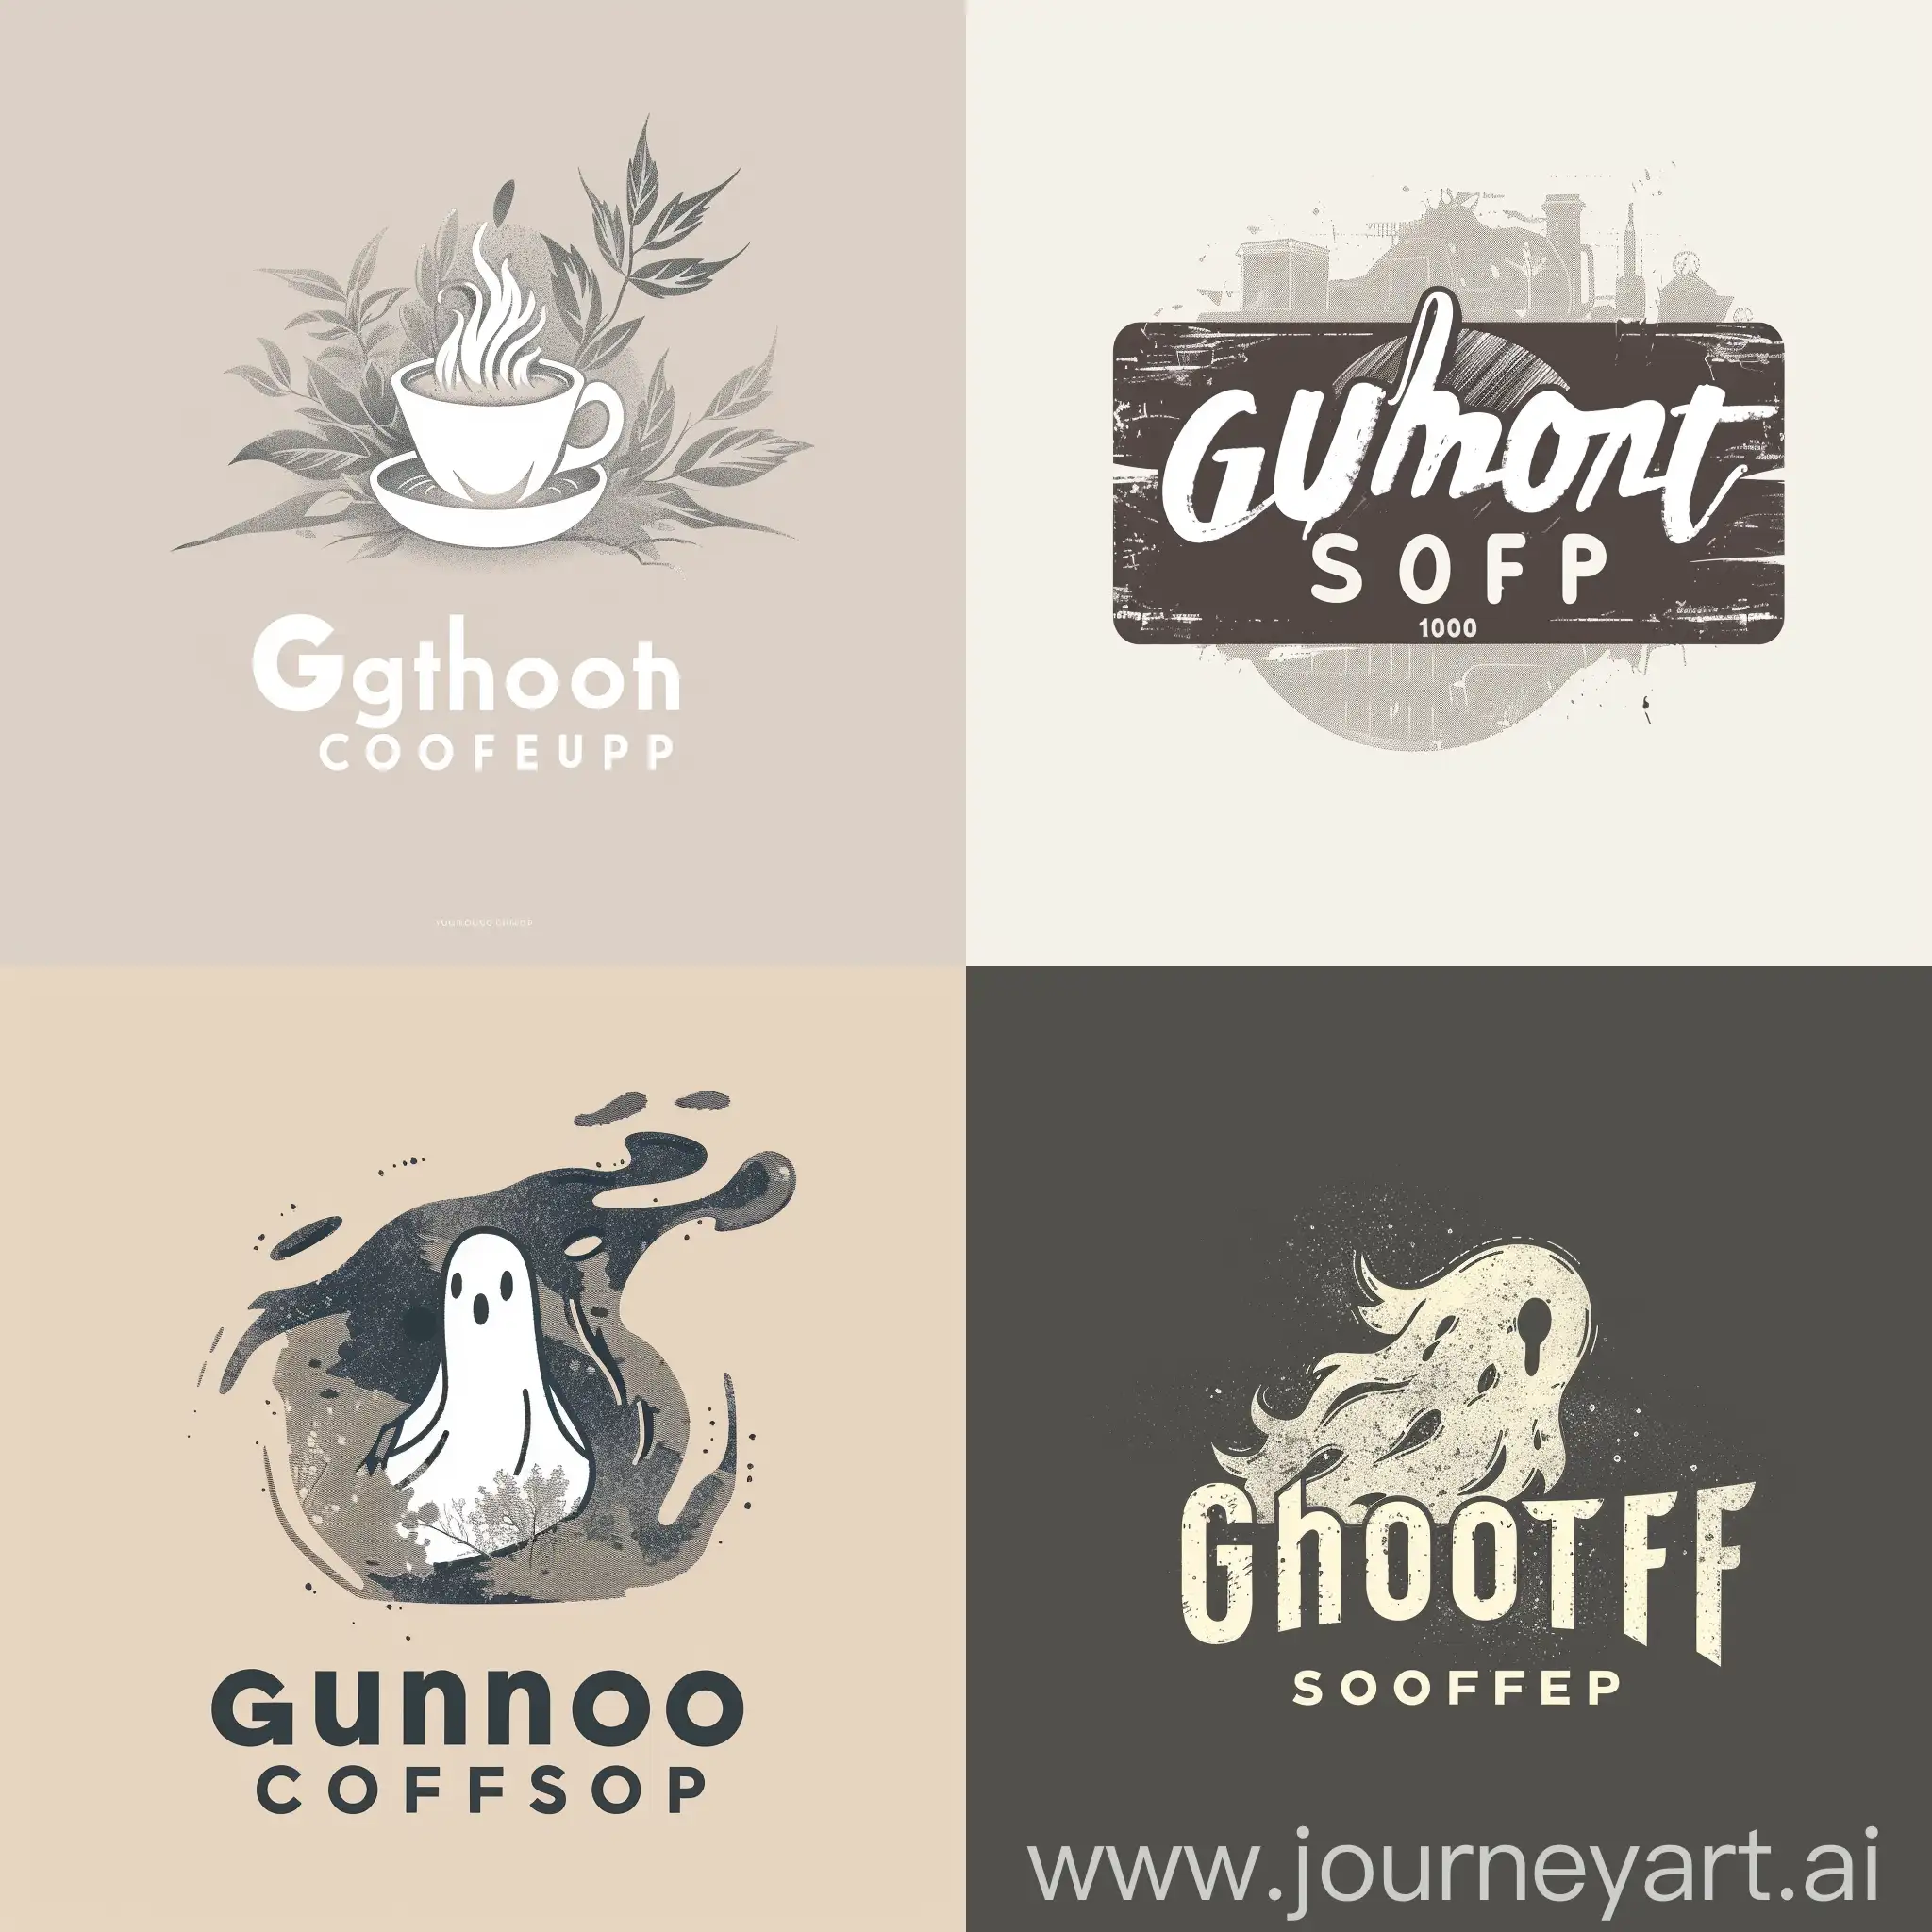 Generate a logo concept for [Ghost Coffee Shop], a [local cafe] located in [London]. The business prides itself on [Unique interior design] and aims to attract [people of all ages].    Please incorporate the following elements into the logo design: - Brand Name: [Ghost Coffee] - Style: [vintage, minimalist] - Color Scheme: [Grey, white]    The logo should convey [the materials is 100% natural] and appeal to [young professionals, families, coffee aficionados].